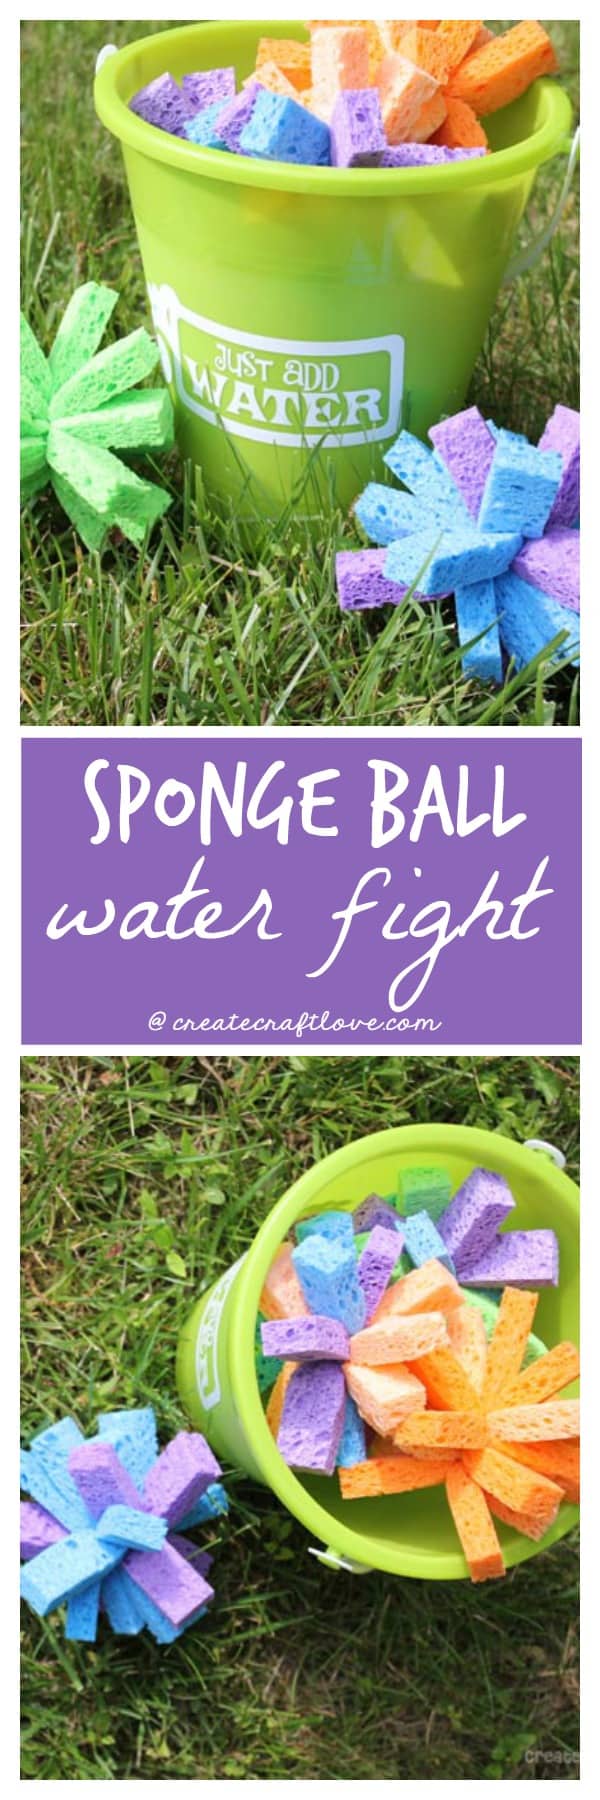 This Sponge Ball Water Fight will keep the kids entertained all summer! via createcraftlove.com